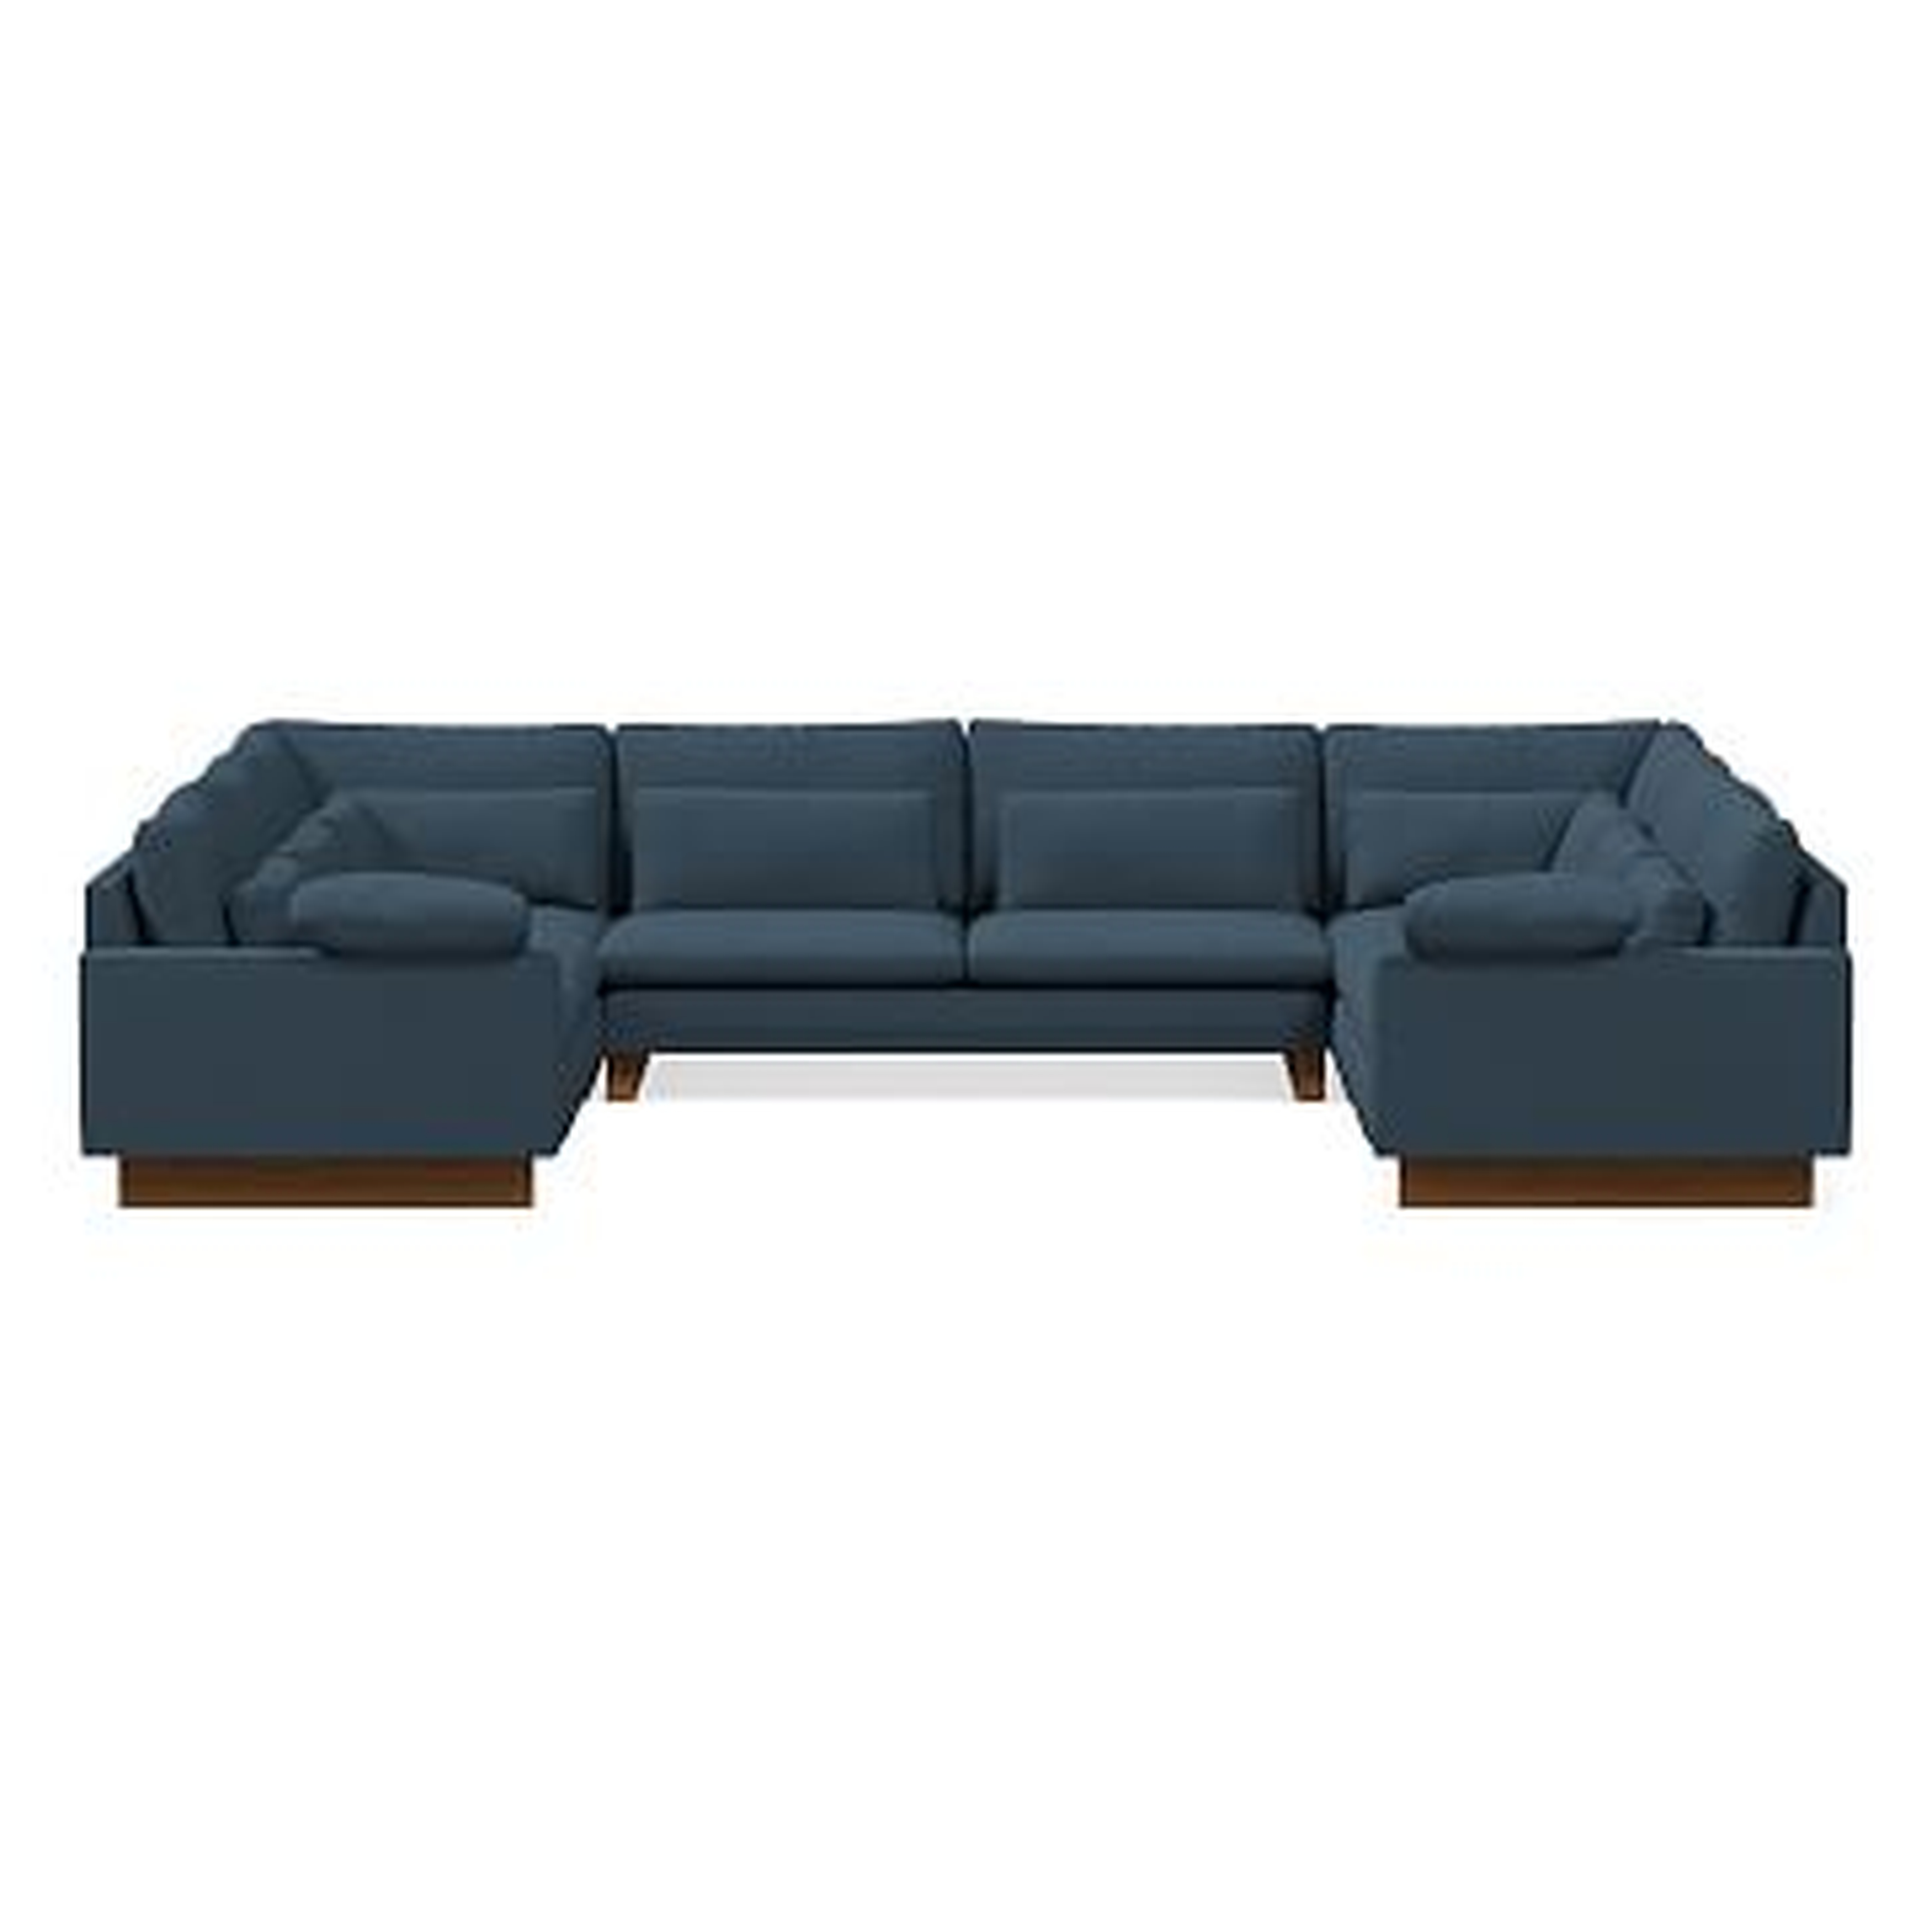 Harmony Sectional Set 04: Right Arm 2.5 Seater Sofa, 2 Corners, Armless Double, Left Arm 2.5 Seater Sofa, Poly, Yarn Dyed Linen Weave, Regal Blue, Dark Walnut - West Elm